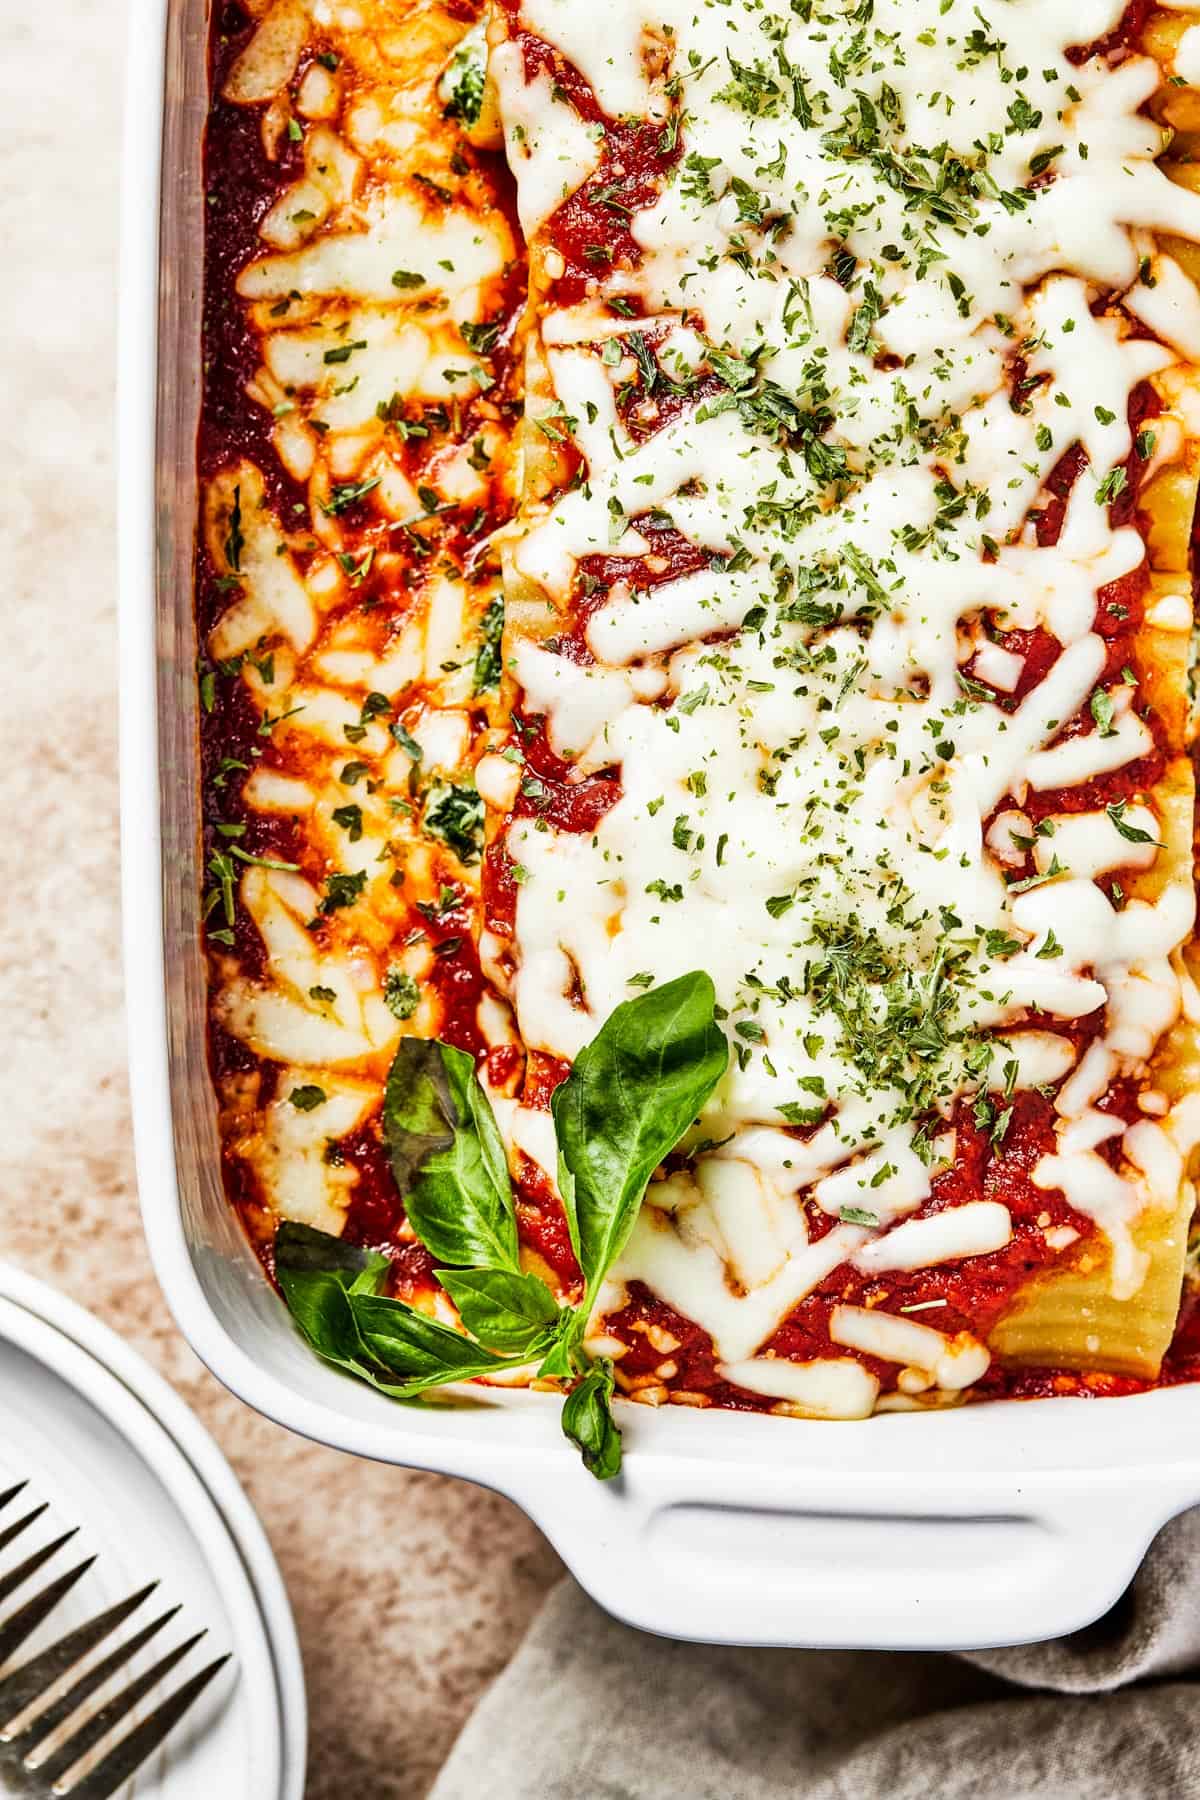 A white dish with pasta, marinara sauce, and melted cheese.